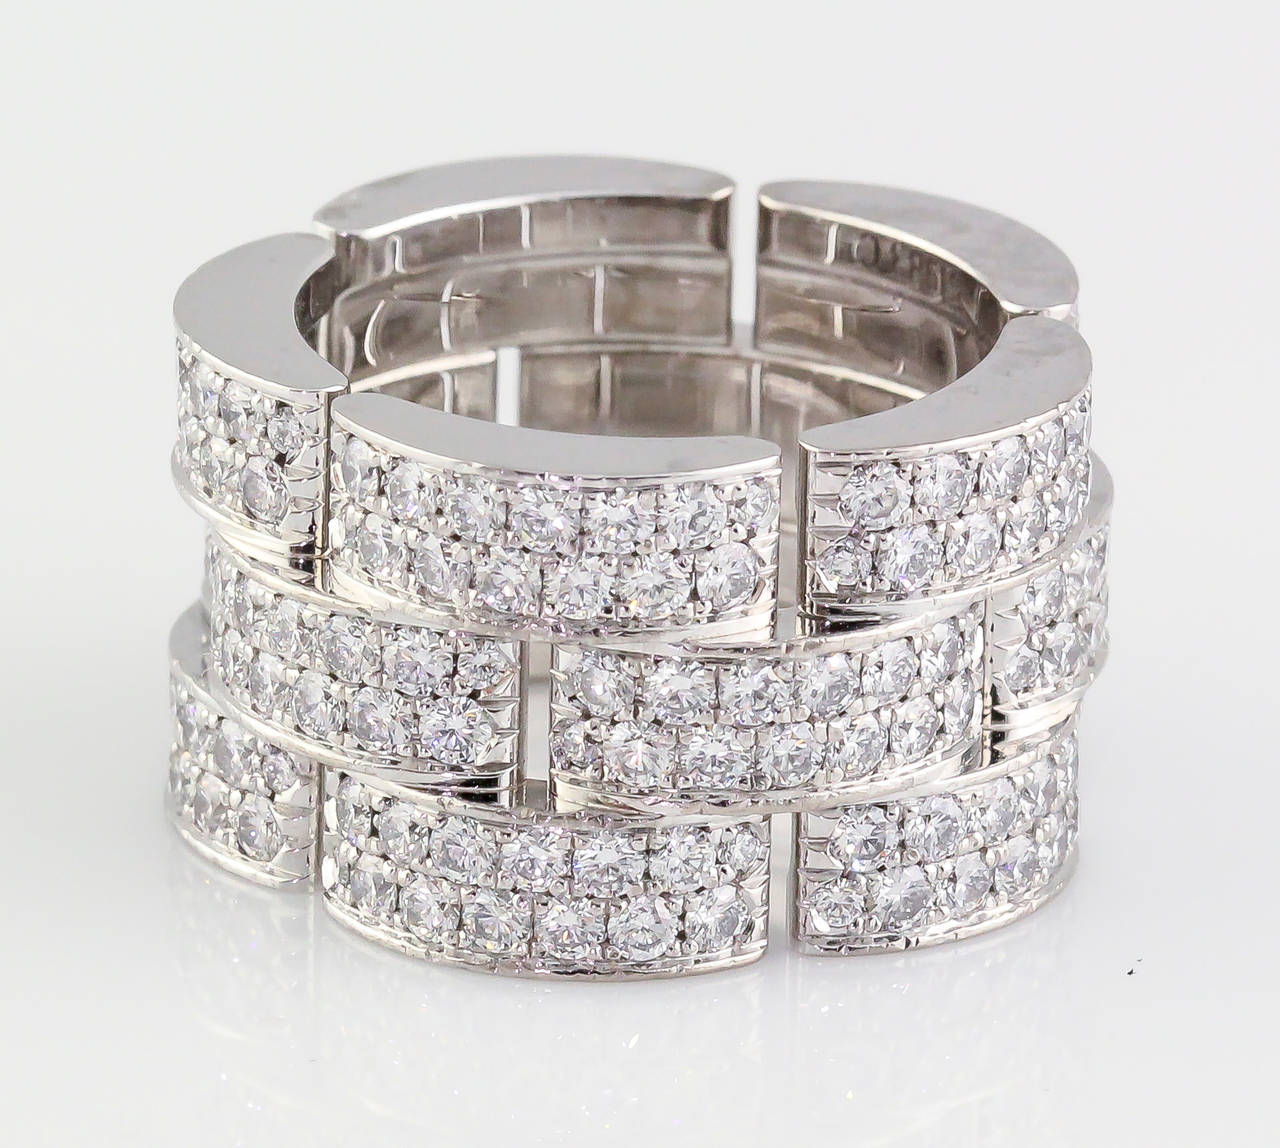 Impressive diamond and 18K white gold band from the 